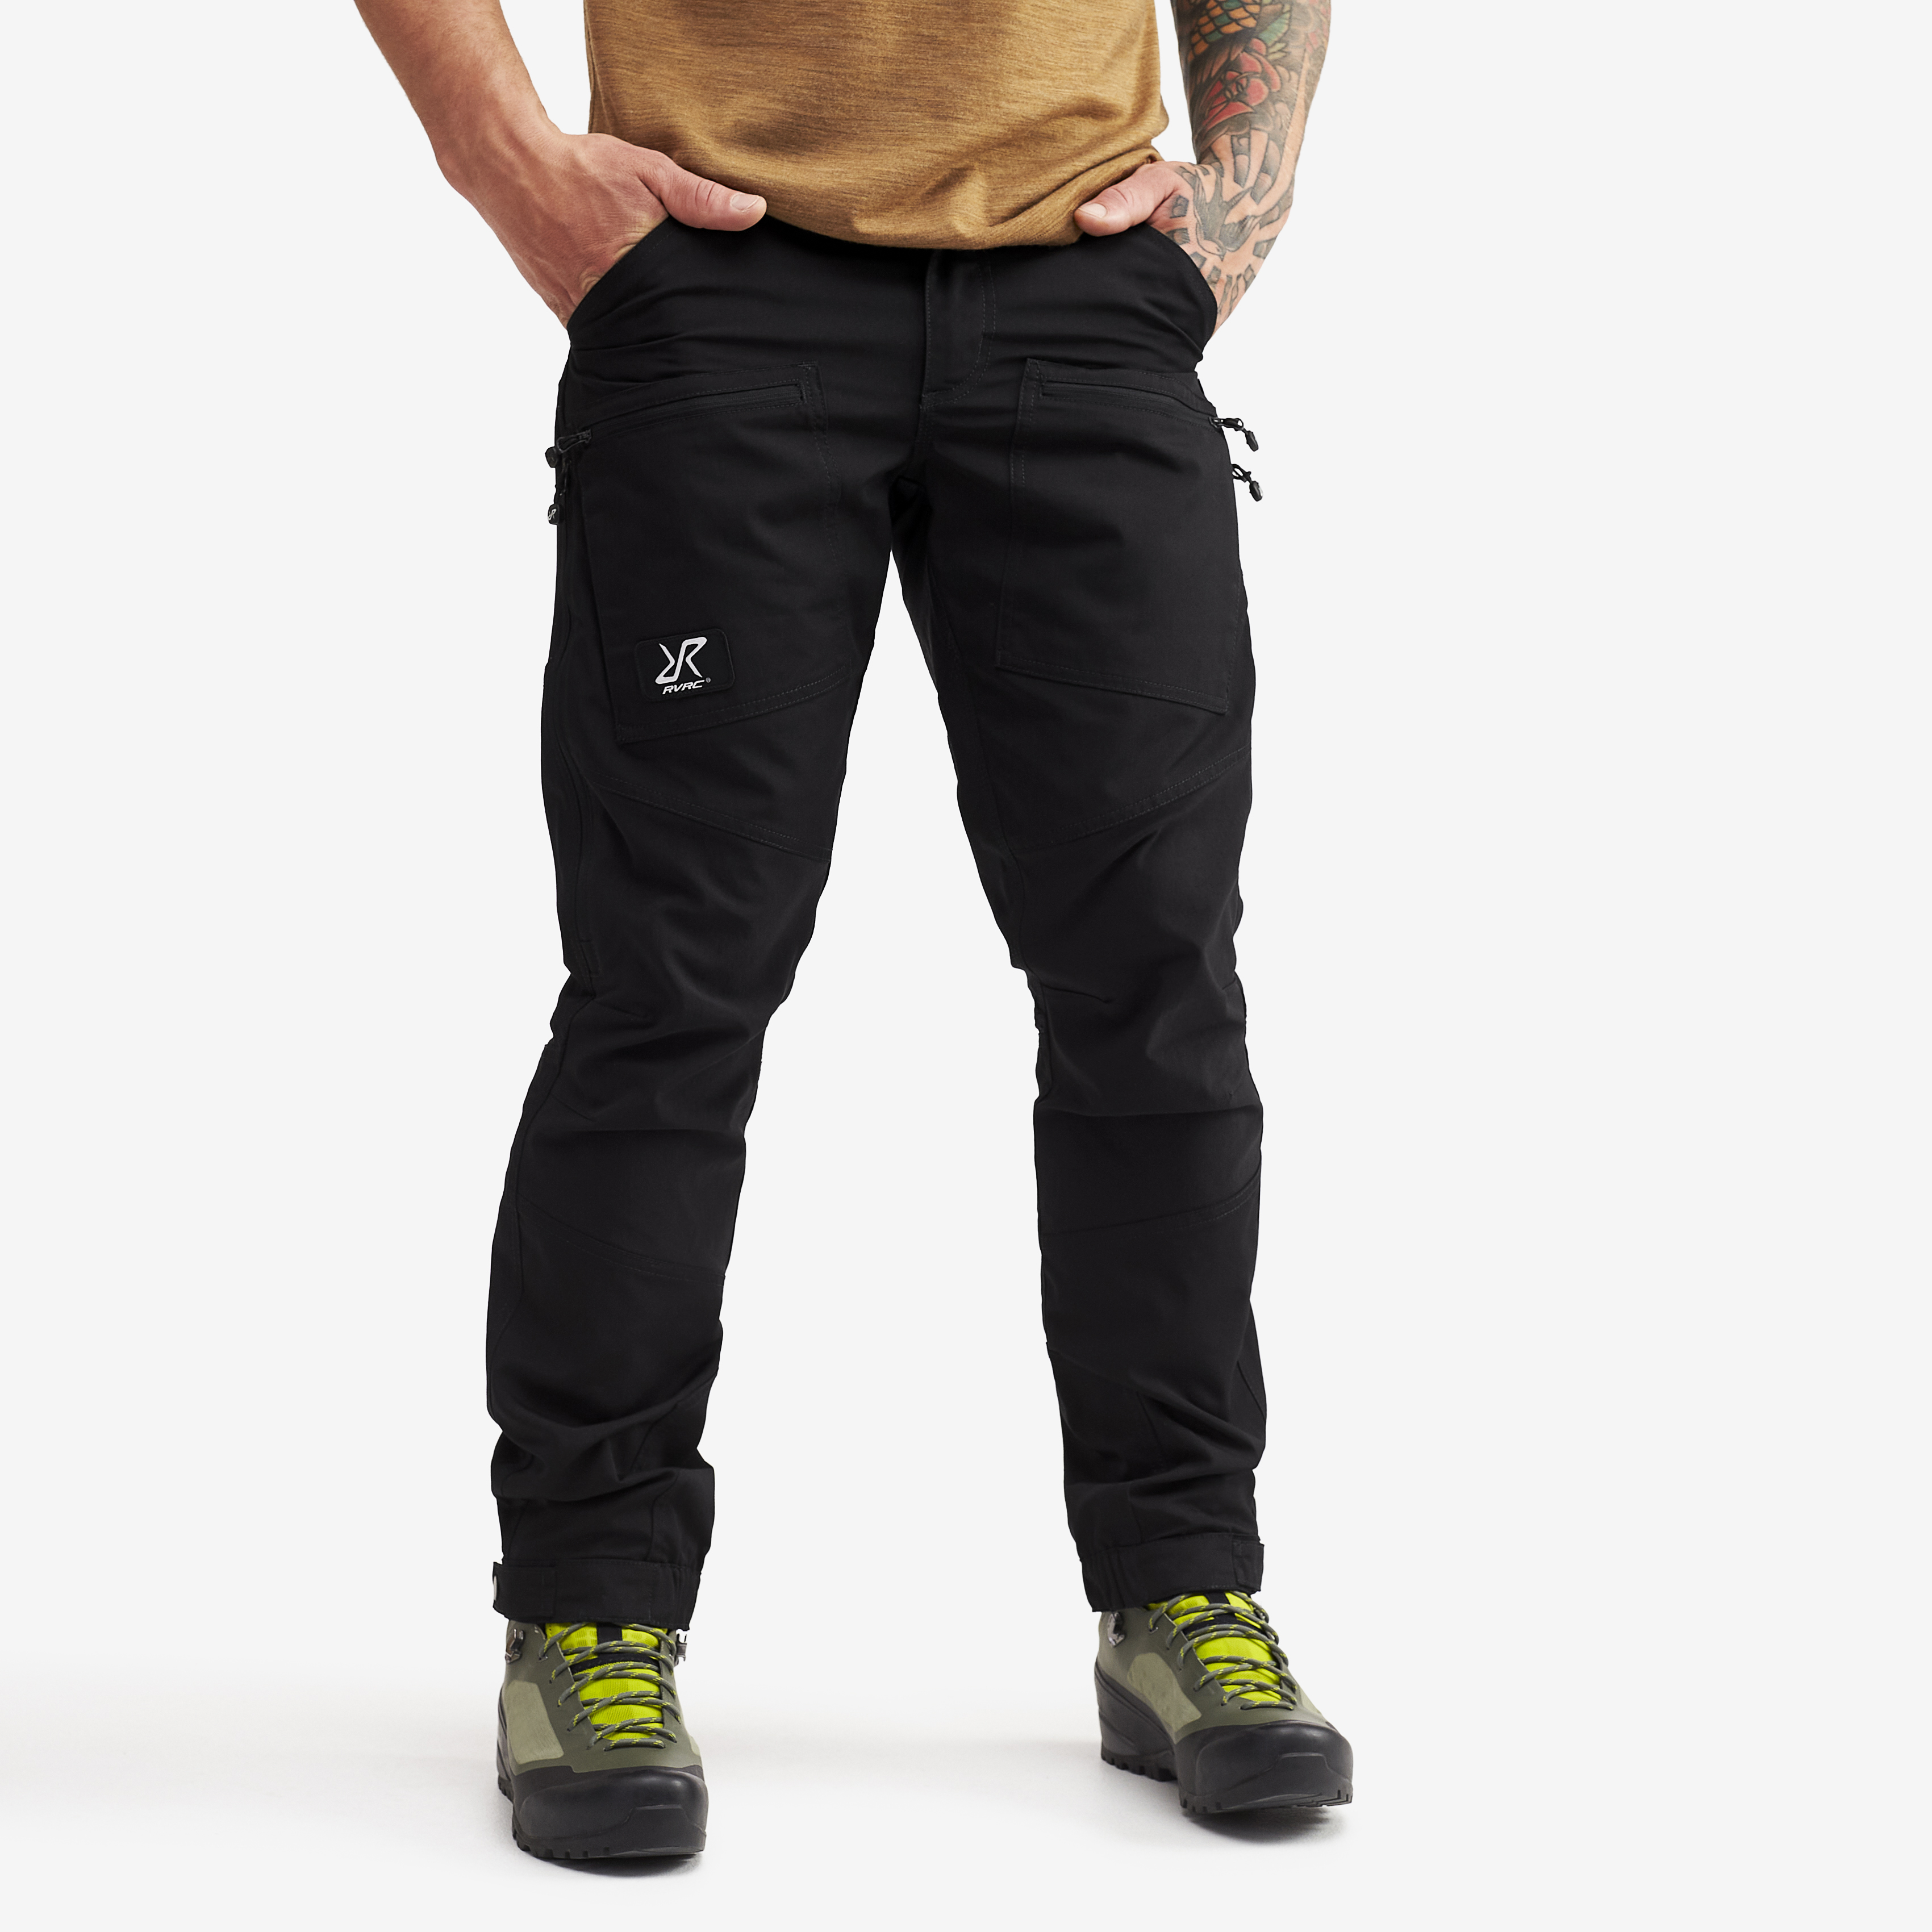 Nordwand Pro Short hiking pants for men in black